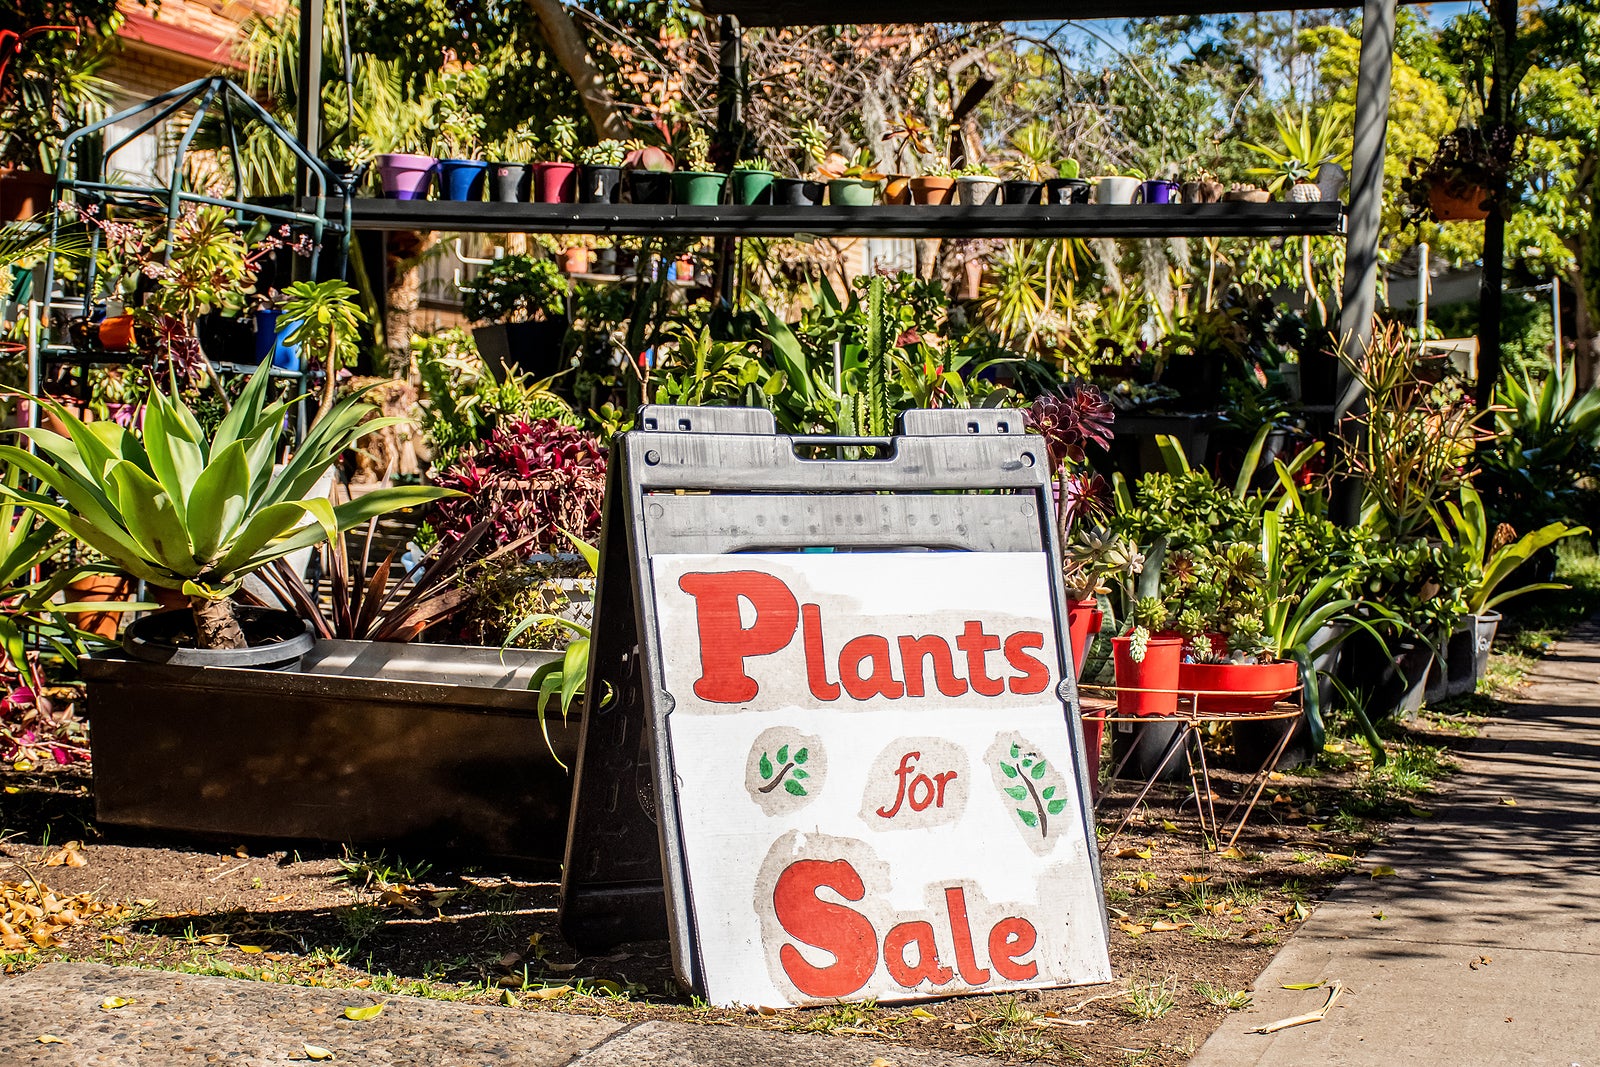 Plants for sale sign in the street. Homegrown plants and flowers pop up shop near the residential house on the street. self-employment business and hobby